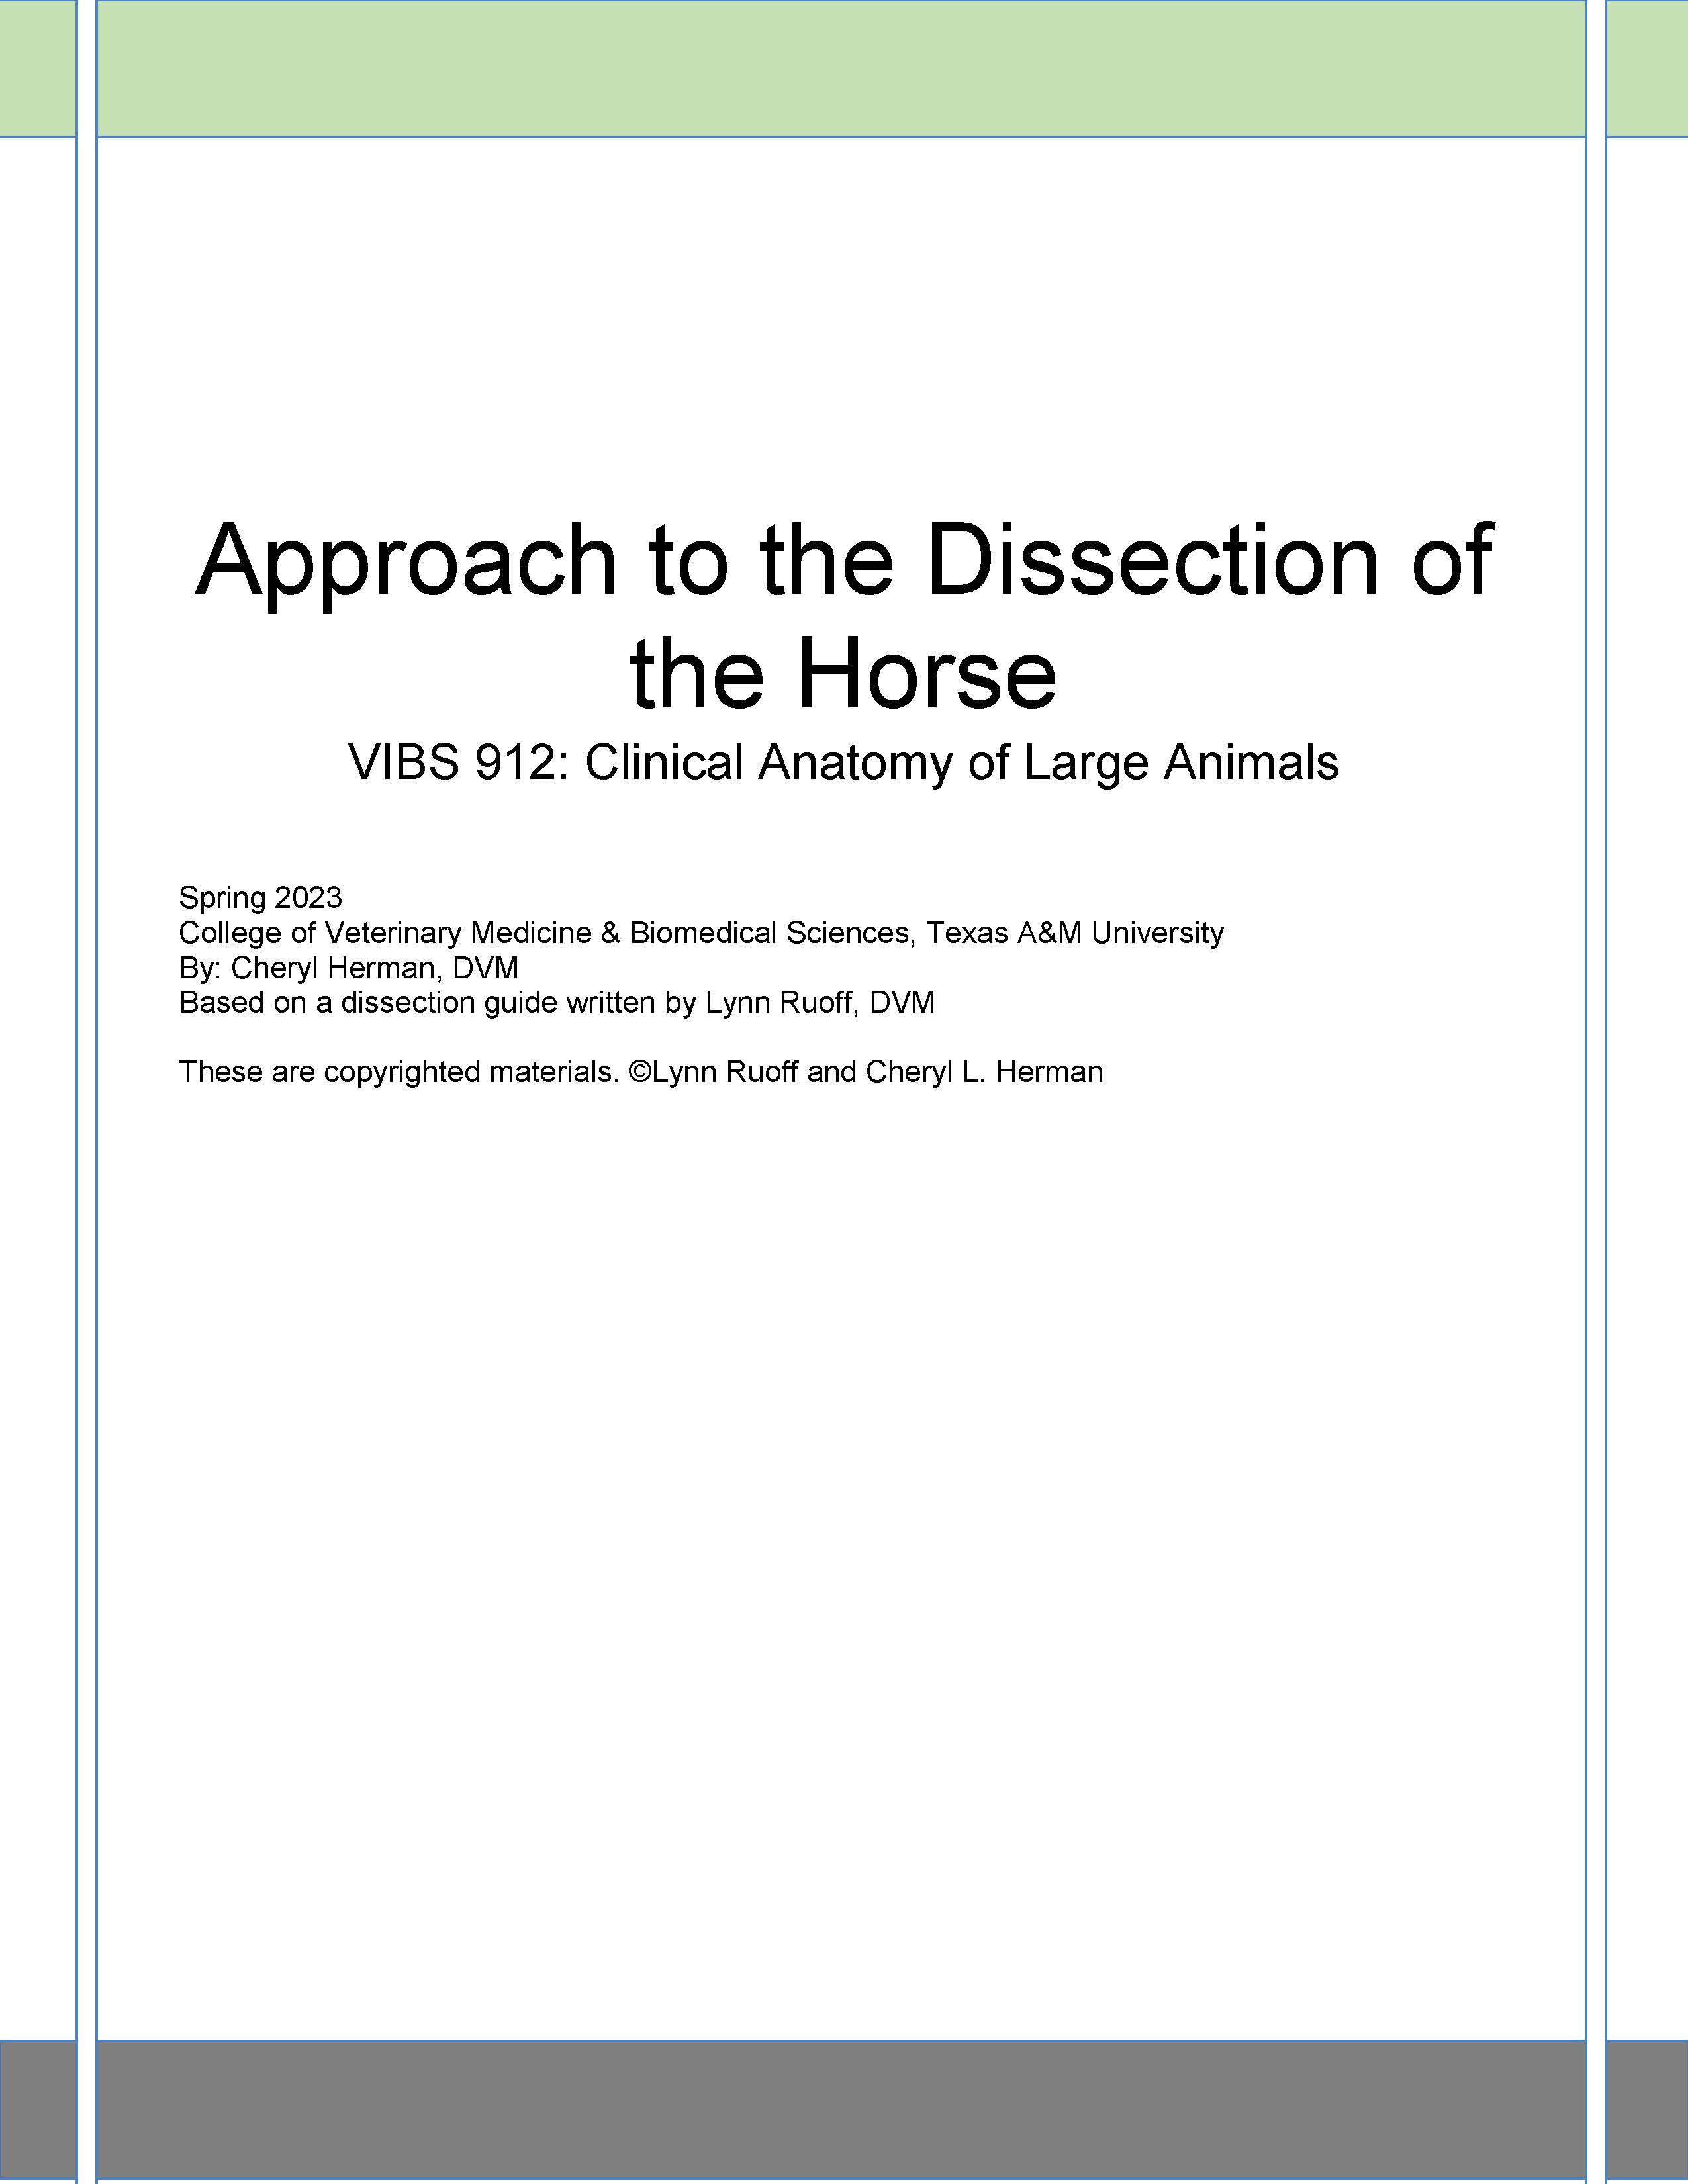 VIBS 912 HORSE Dissection Guide - Spring 2023